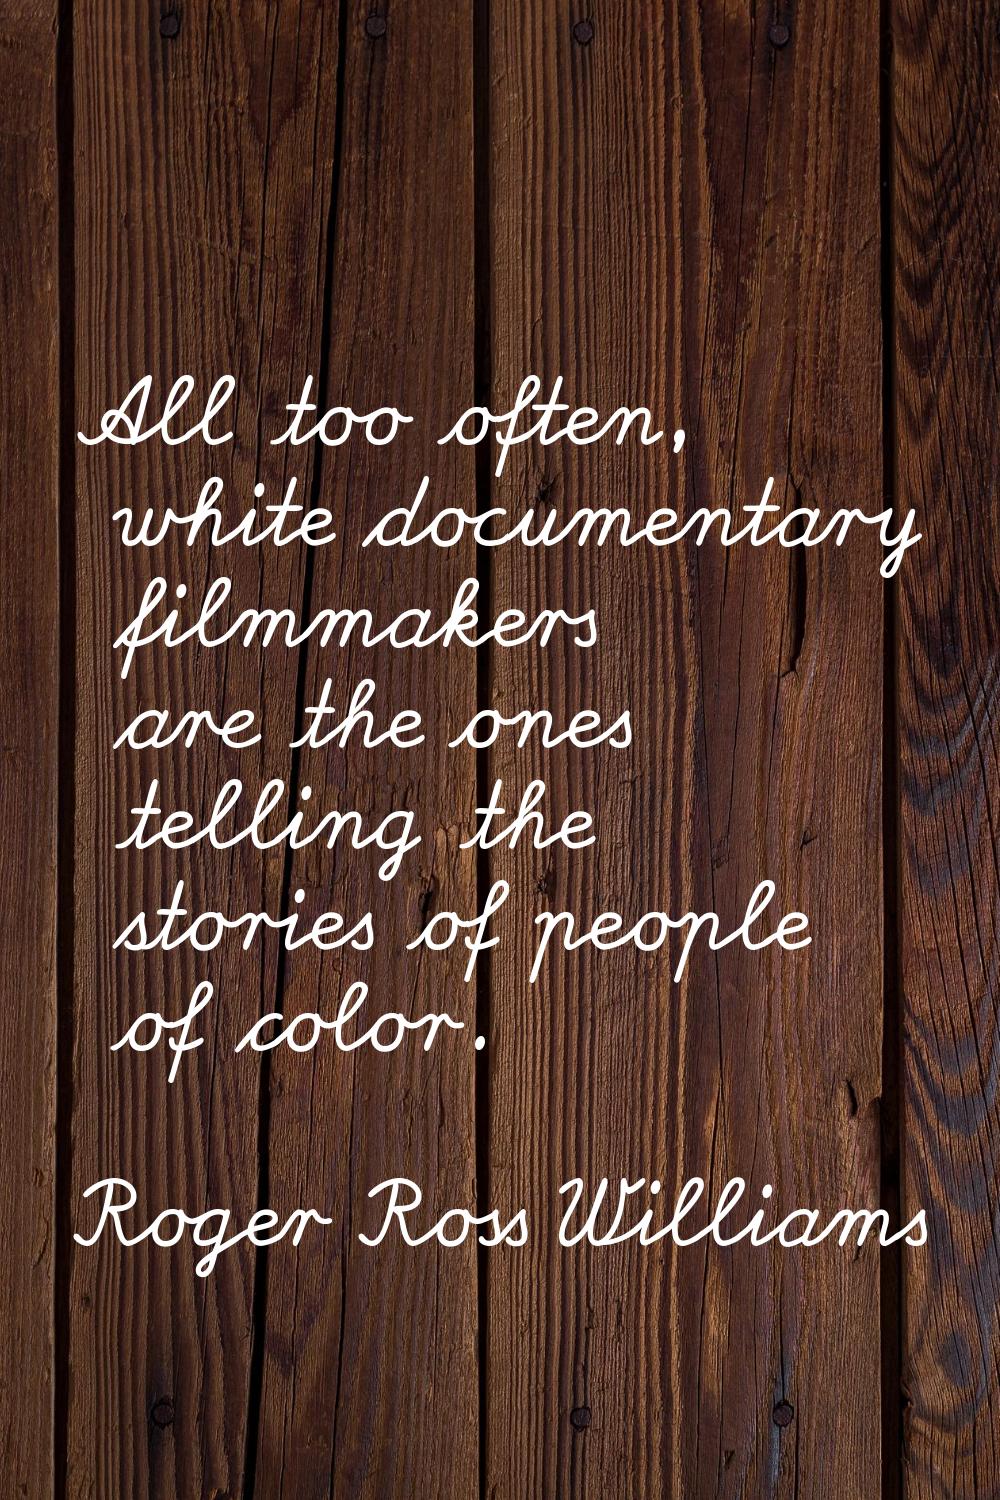 All too often, white documentary filmmakers are the ones telling the stories of people of color.